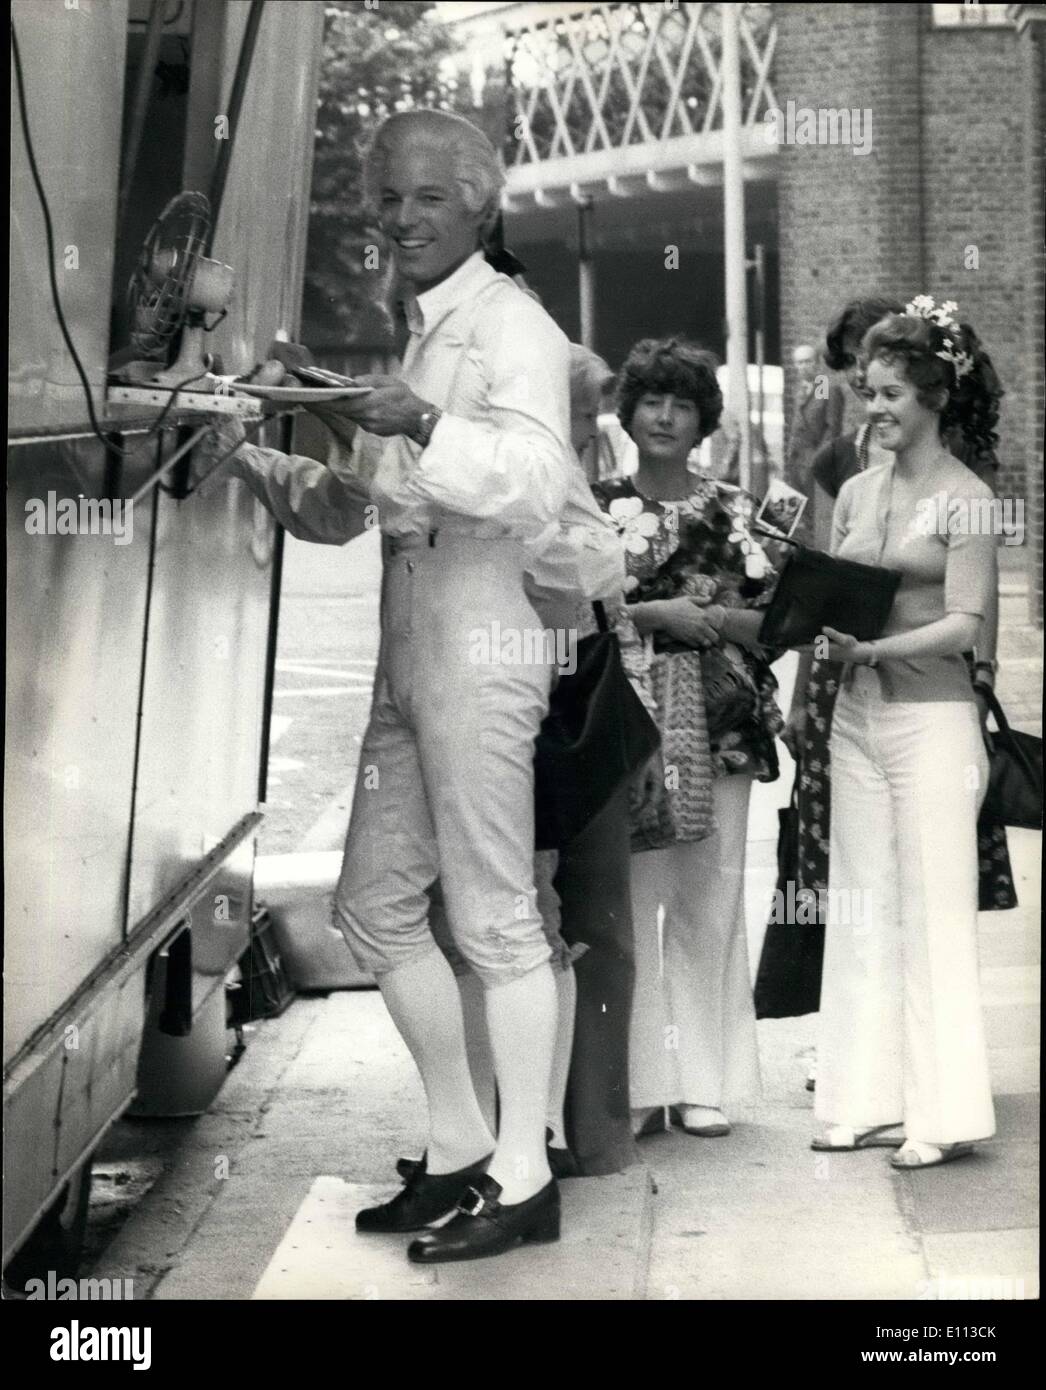 Jul. 07, 1975 - Prince Charming takes his queue for food. Richard Chamberlain who plays the part of Prince Charming in the new &pound;2 million British musical Cinderella is seen here queuing for food during a break in filming. The marriage scene is filmed inside Southwark Cathedral to give the marriage of Prince Charming and Cinderella more realism. Photo Shows: - Richard Chamberlain lines up for food with his co-star Gemma Craven who plays Cinderella standing to his right. Stock Photo